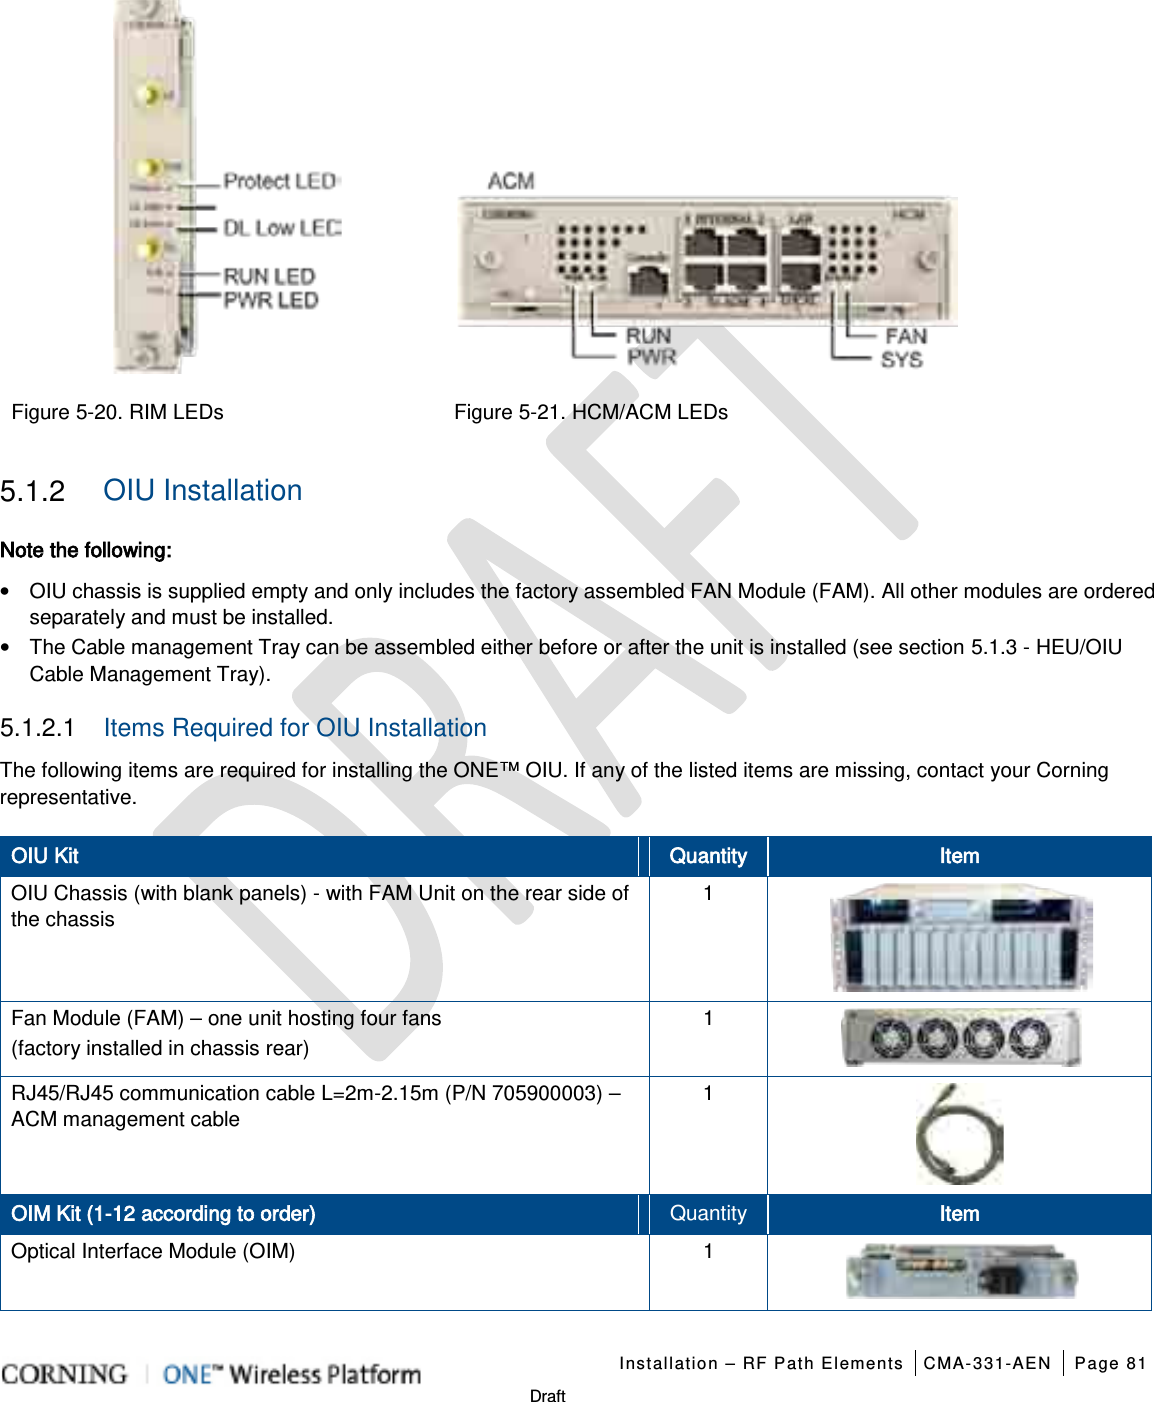   Installation – RF Path Elements CMA-331-AEN Page 81   Draft    Figure  5-20. RIM LEDs Figure  5-21. HCM/ACM LEDs 5.1.2  OIU Installation Note the following: • OIU chassis is supplied empty and only includes the factory assembled FAN Module (FAM). All other modules are ordered separately and must be installed. • The Cable management Tray can be assembled either before or after the unit is installed (see section  5.1.3 - HEU/OIU Cable Management Tray). 5.1.2.1  Items Required for OIU Installation The following items are required for installing the ONE™ OIU. If any of the listed items are missing, contact your Corning representative. OIU Kit Quantity Item OIU Chassis (with blank panels) - with FAM Unit on the rear side of the chassis 1  Fan Module (FAM) – one unit hosting four fans   (factory installed in chassis rear) 1  RJ45/RJ45 communication cable L=2m-2.15m (P/N 705900003) – ACM management cable   1  OIM Kit (1-12 according to order) Quantity Item Optical Interface Module (OIM)      1  